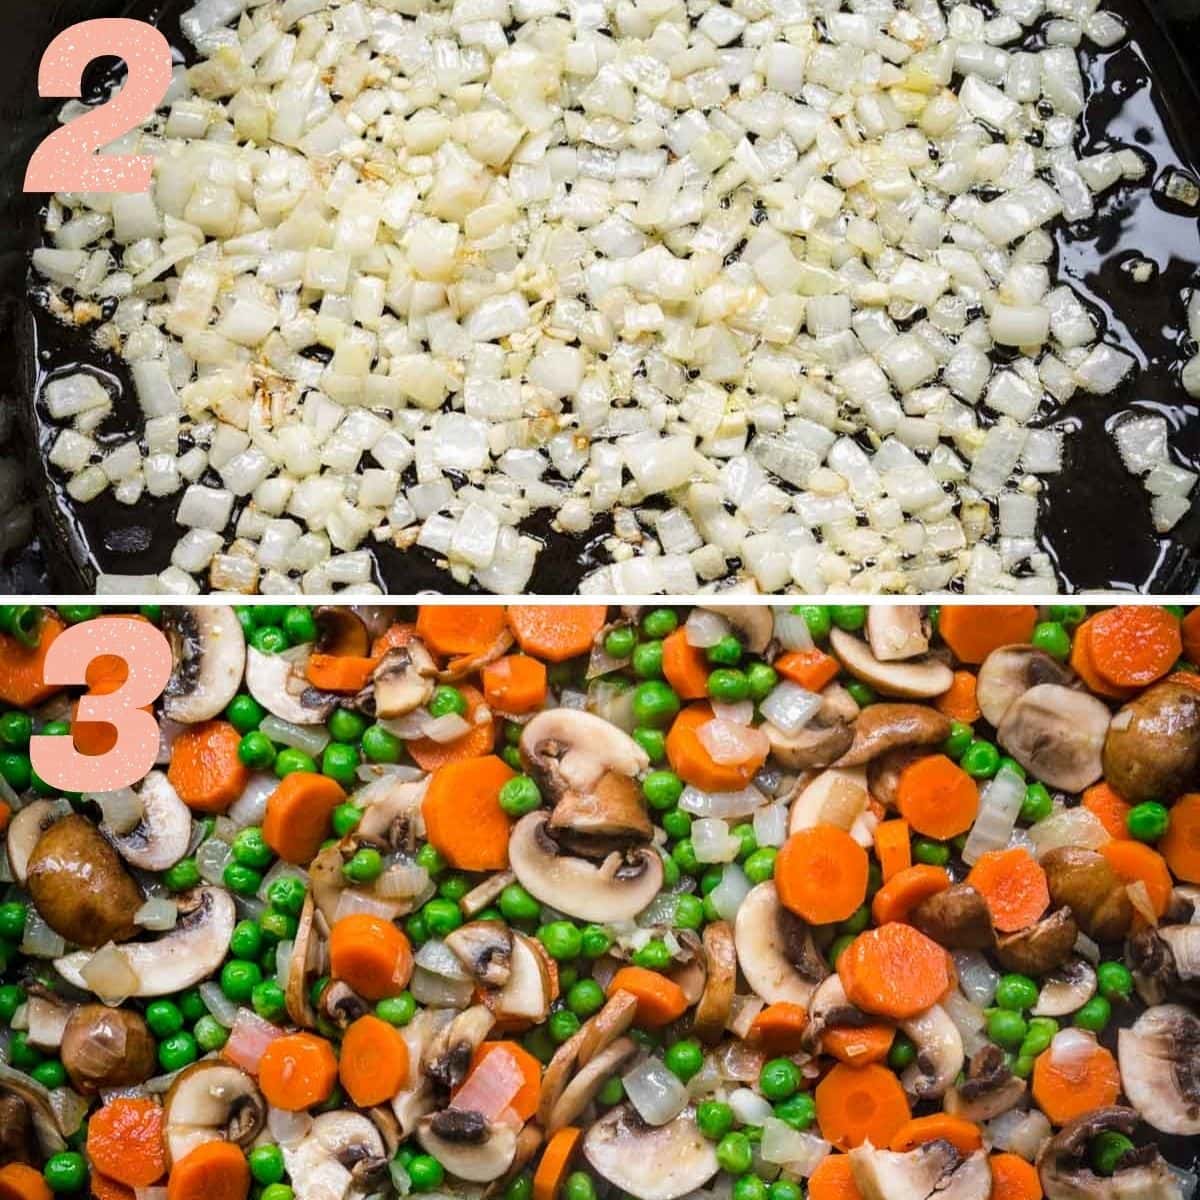 On top: onions being sauteed. On the bottom: adding in mushrooms, carrots, and peas.